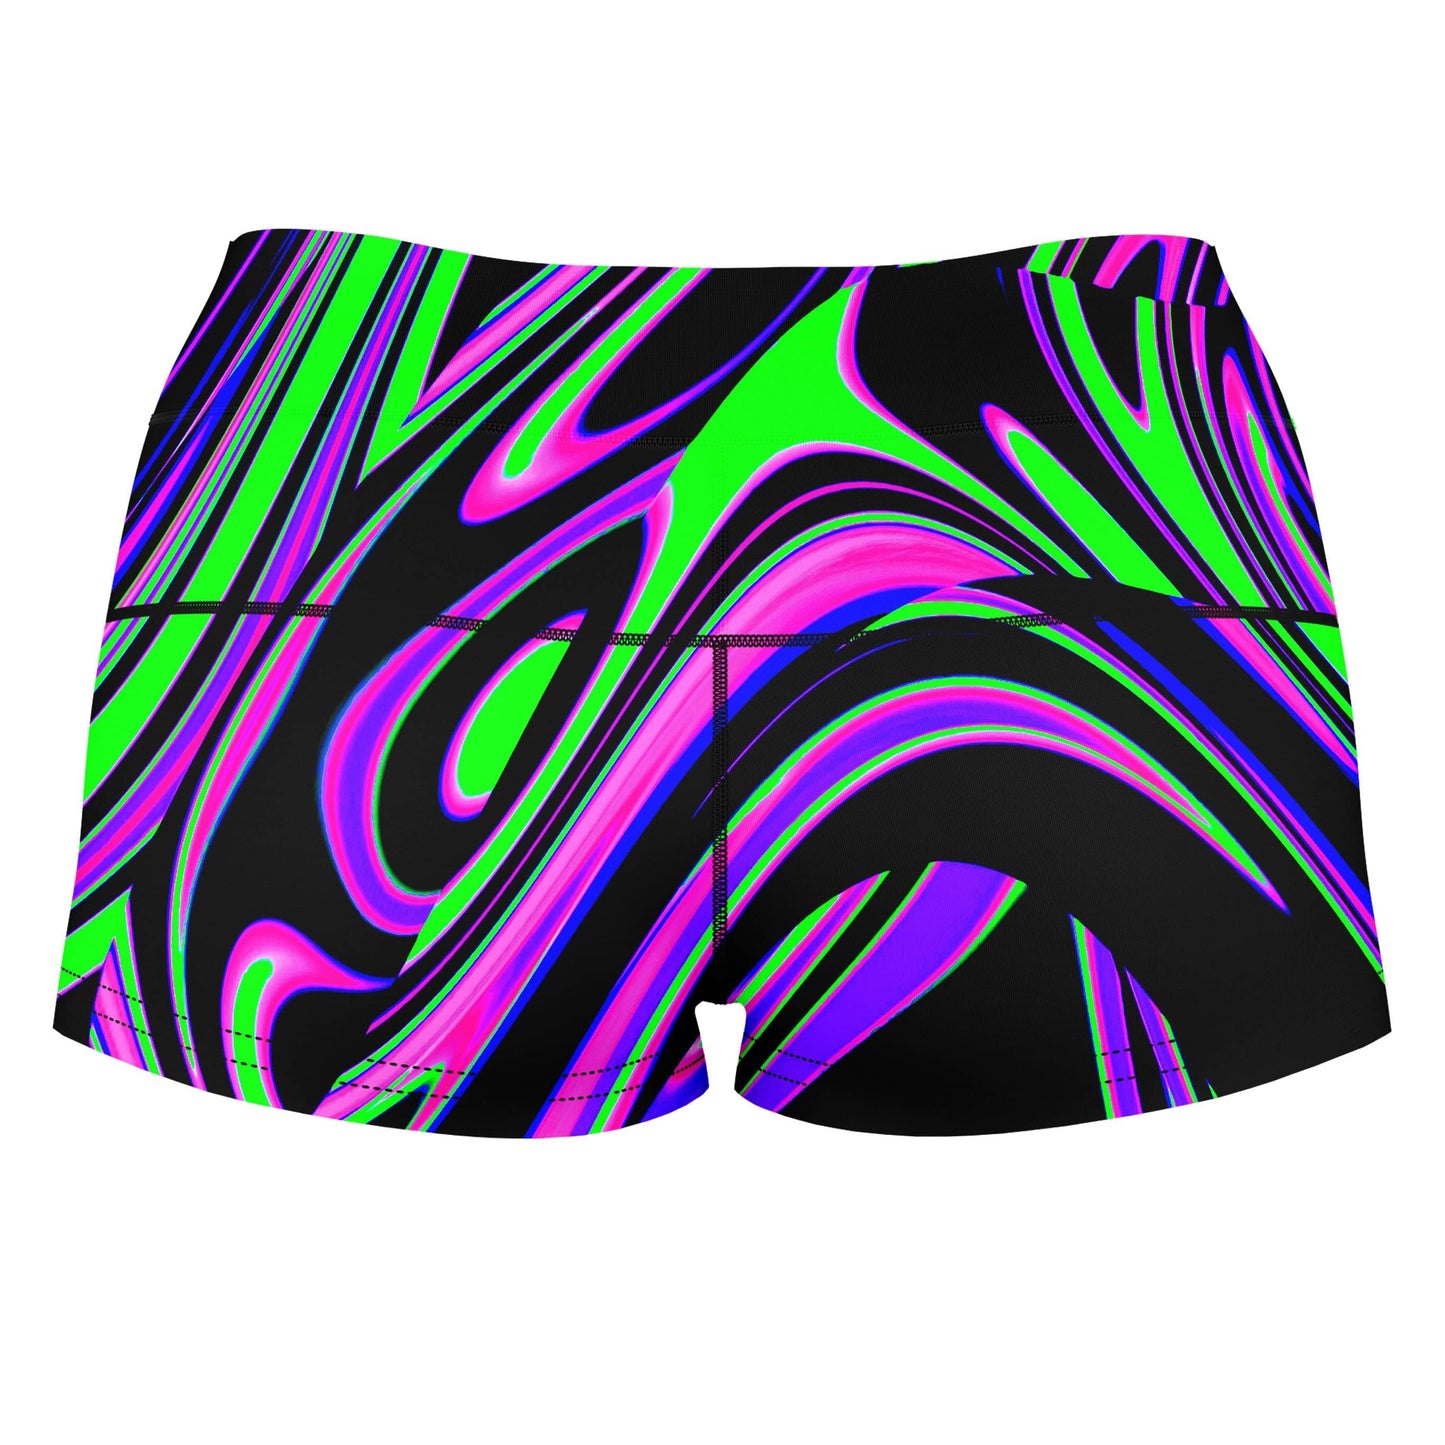 Violet and Lime Blackout Drip High-Waisted Women's Shorts, Big Tex Funkadelic, | iEDM